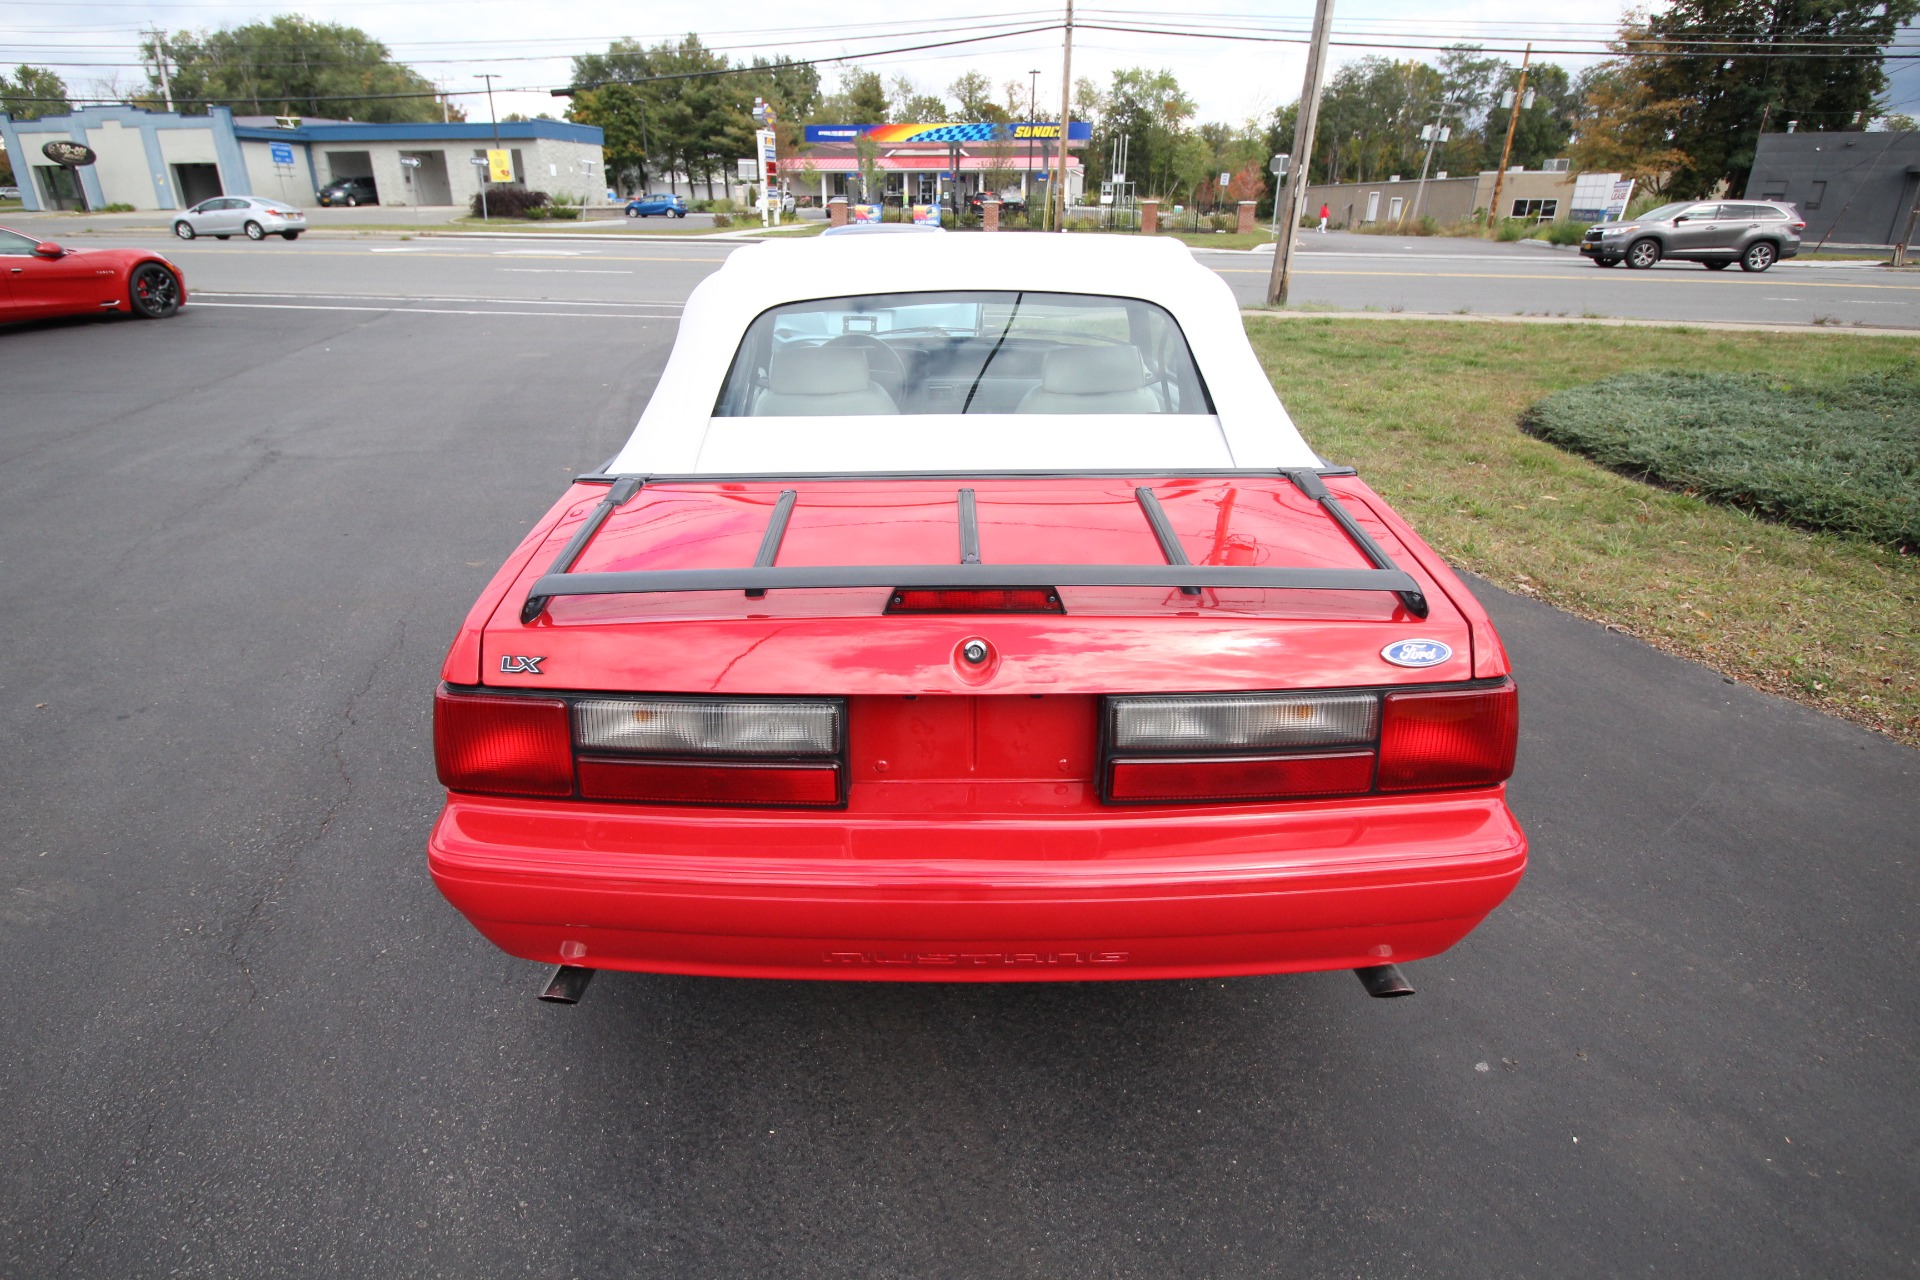 Used 1993 RED Ford Mustang LX 5.0L CONVERTIBLE 5 SPEED MANUAL RARE CAR RARE CONDITION | Albany, NY